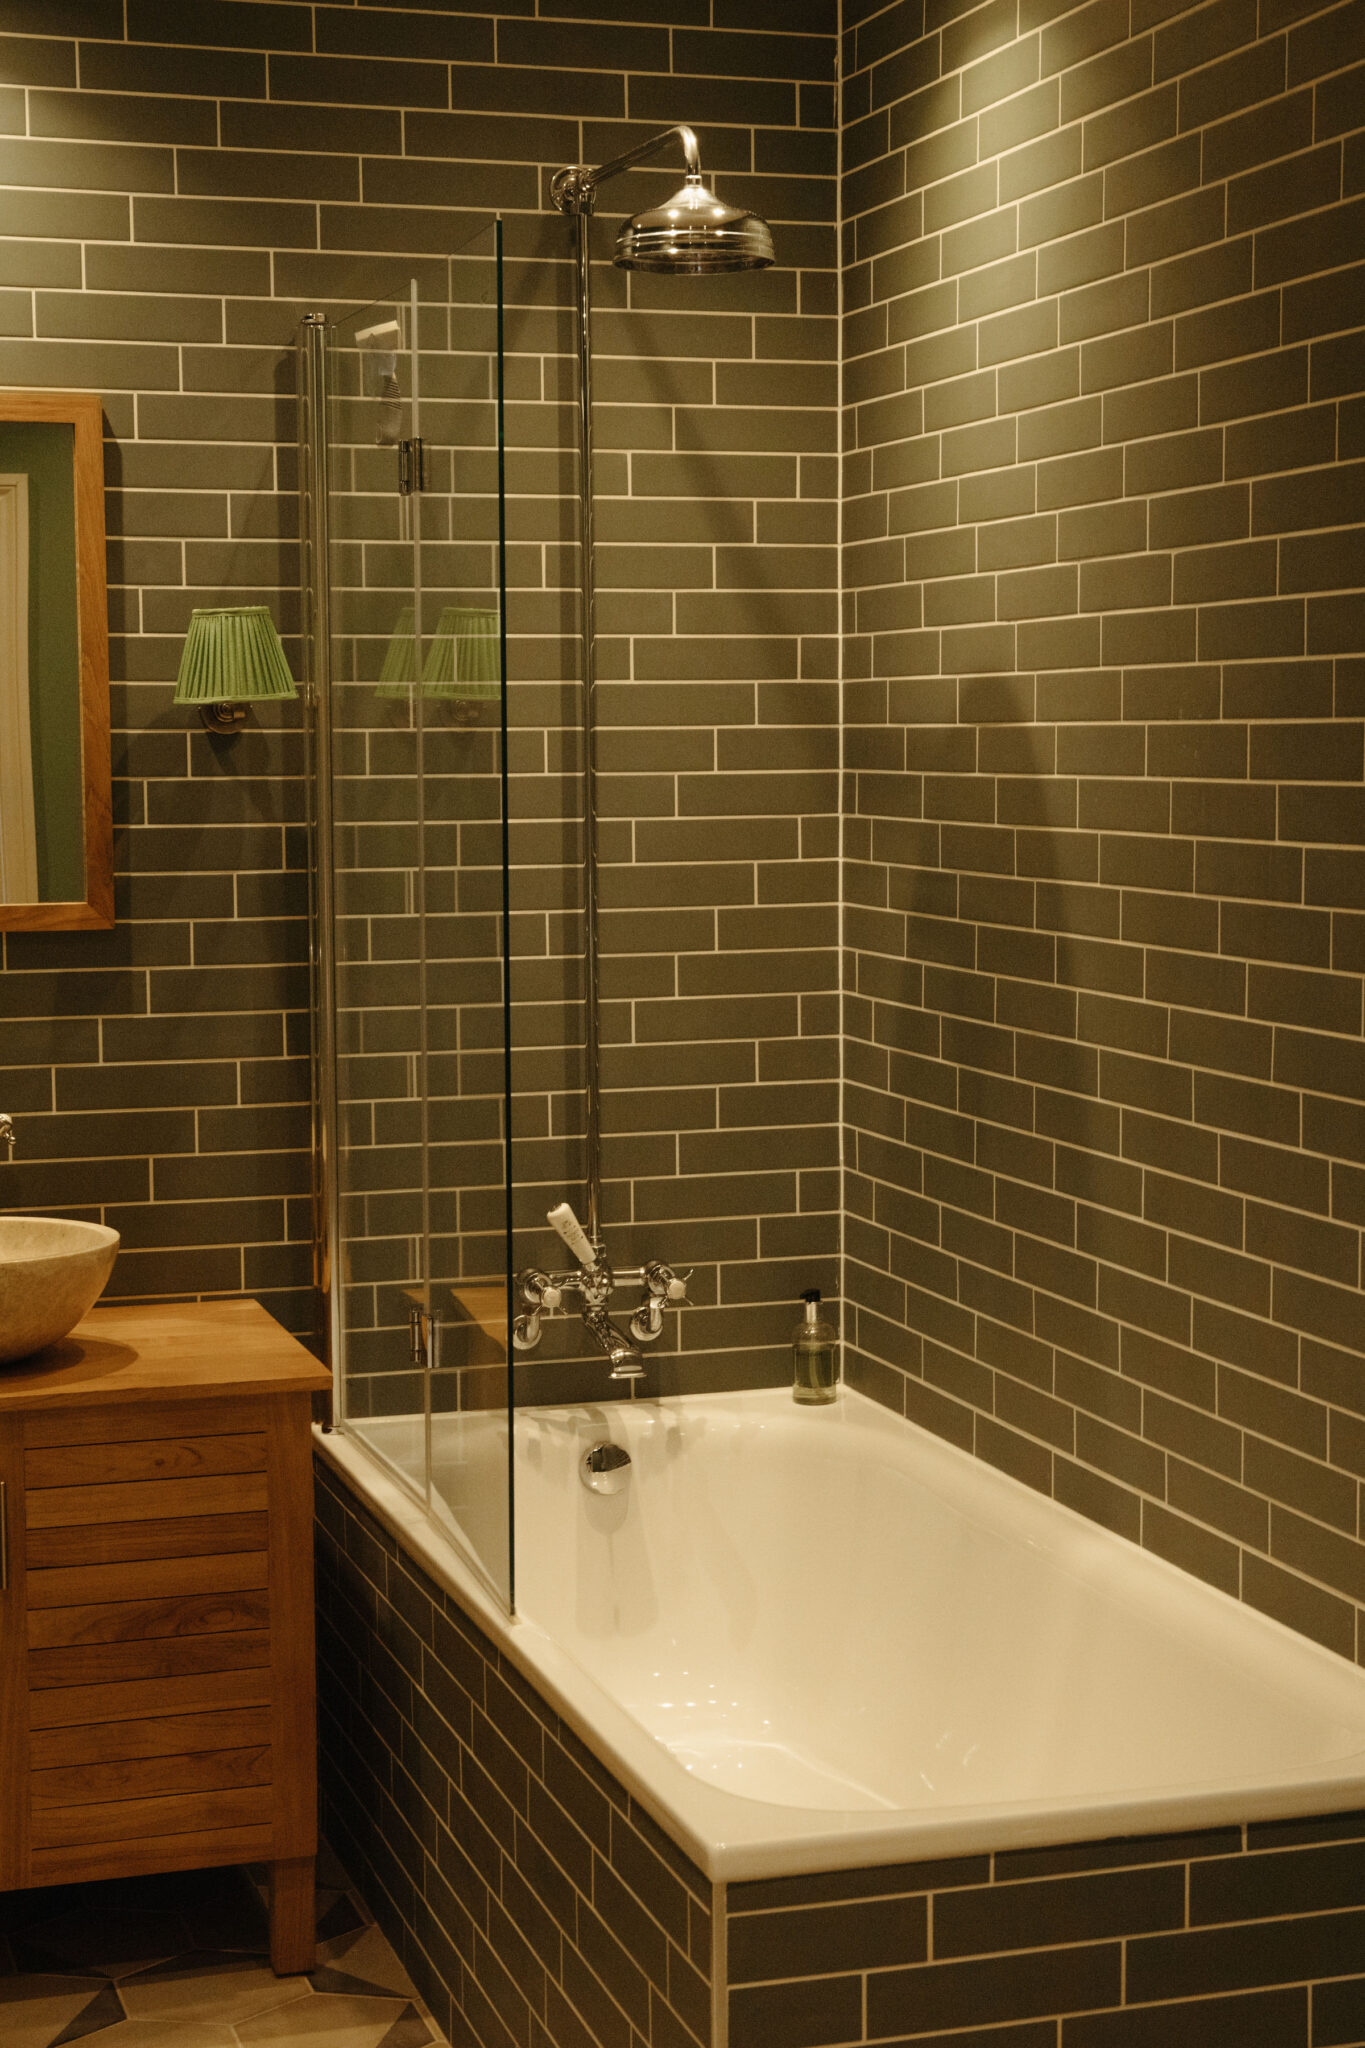 Bathroom and shower with green tiles